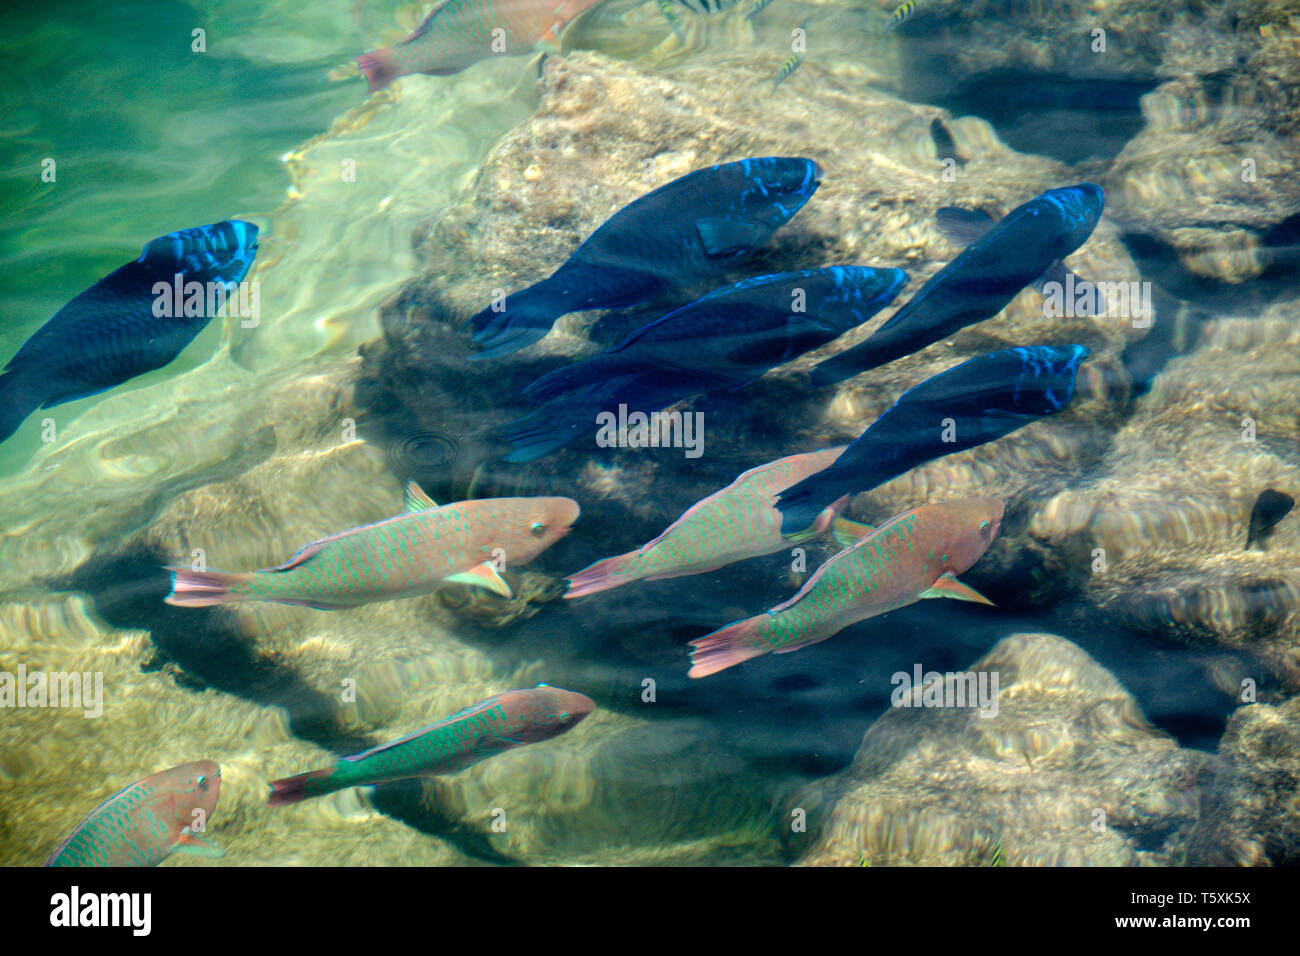 Native fish by the coast of Cape Florida, at the south end of Key Biscayne in Miami-Dade County, Florida, USA. Stock Photo